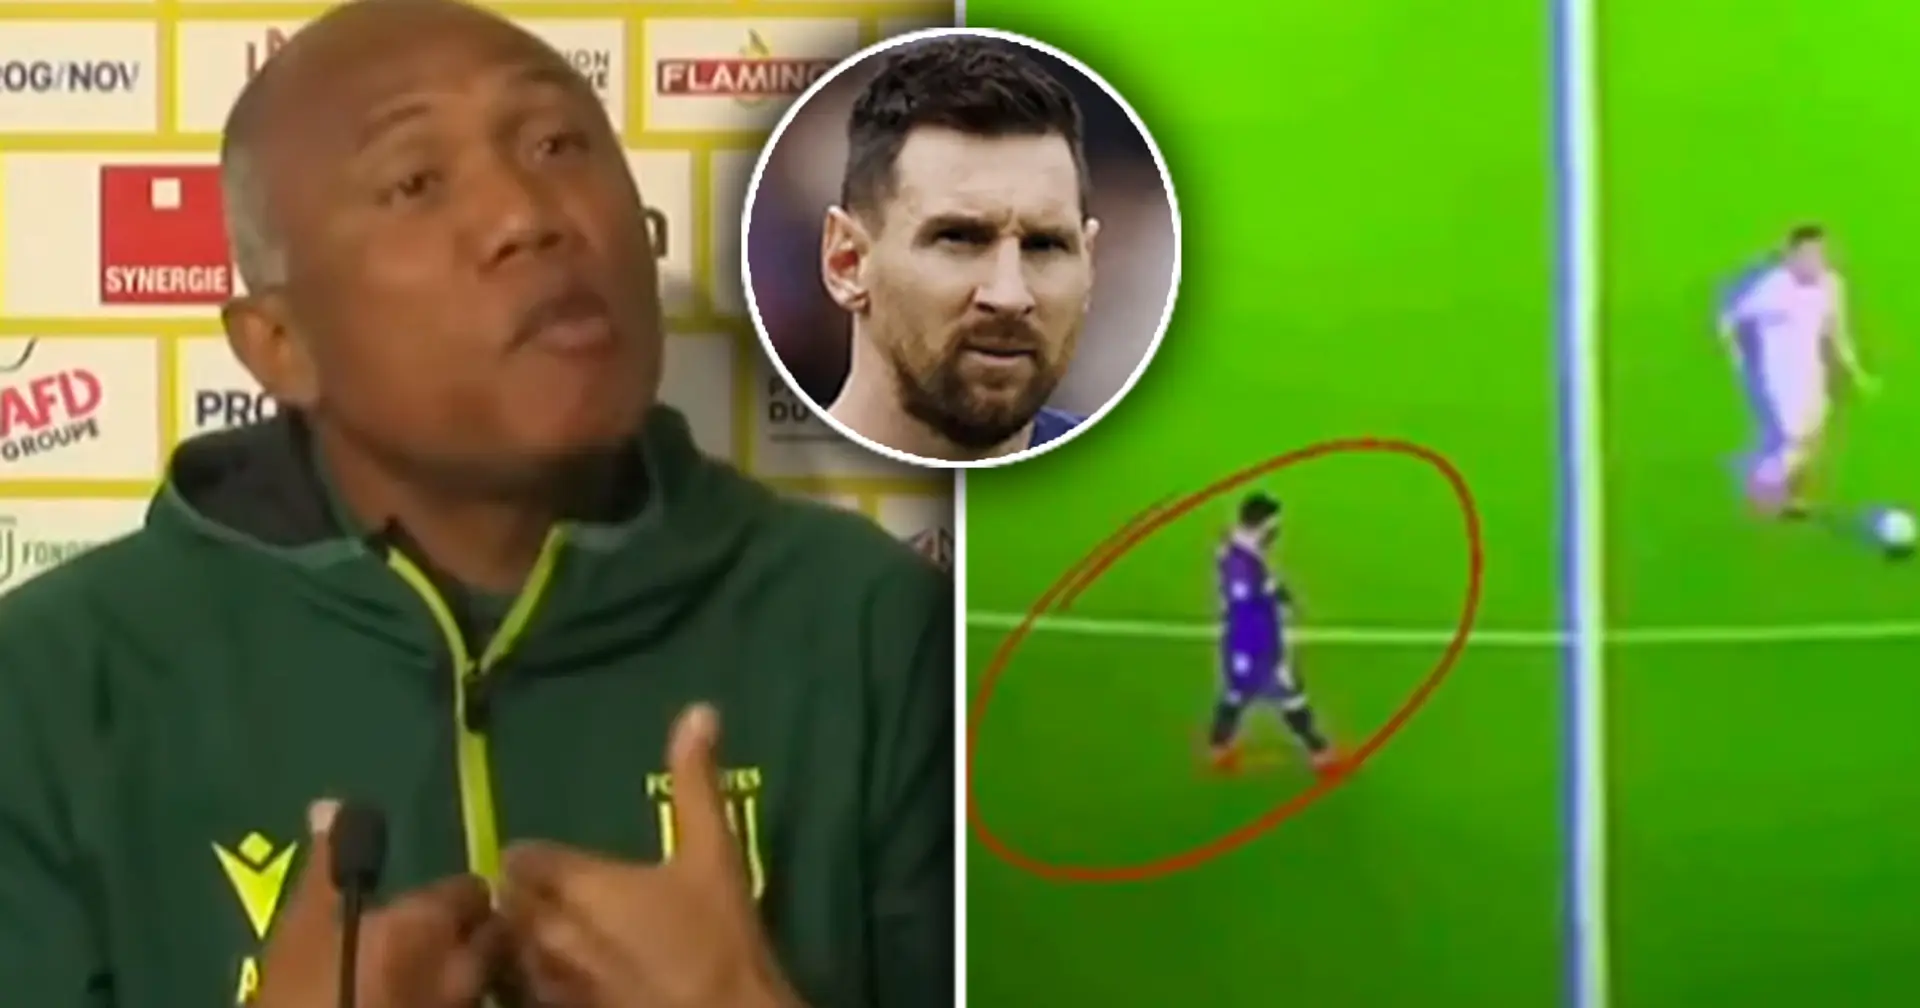 'If I had him, I'd tell him to never defend': Nantes coach delivers brilliant take on 'lazy Messi' cliche